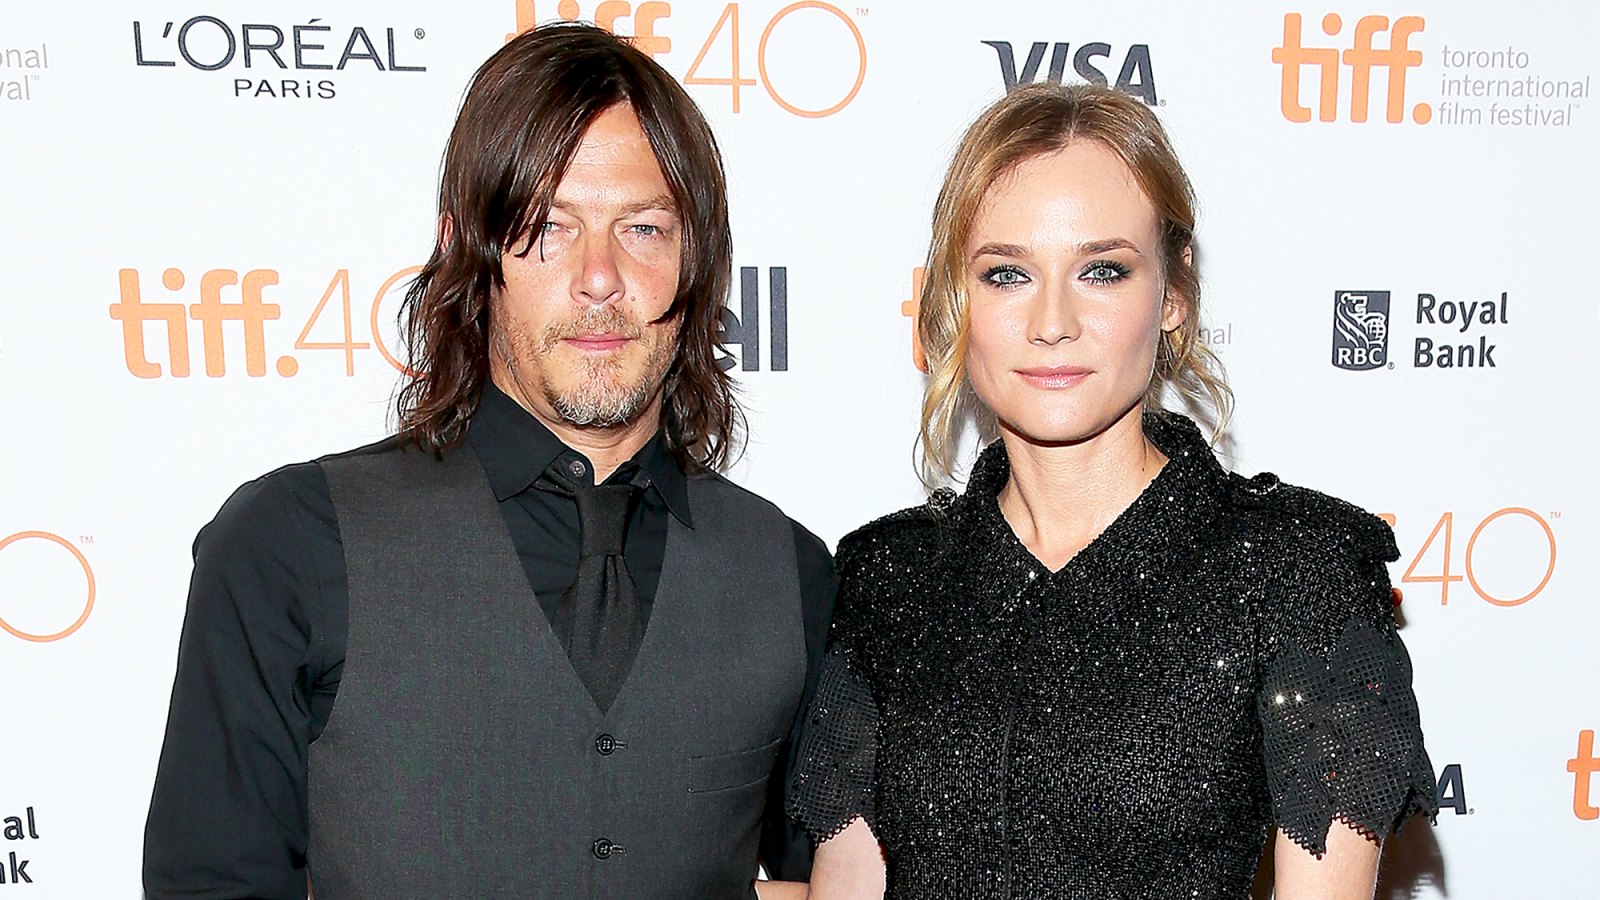 Norman Reedus and Diane Kruger attend the 2015 Toronto International Film Festival at The Elgin in Toronto, Canada.